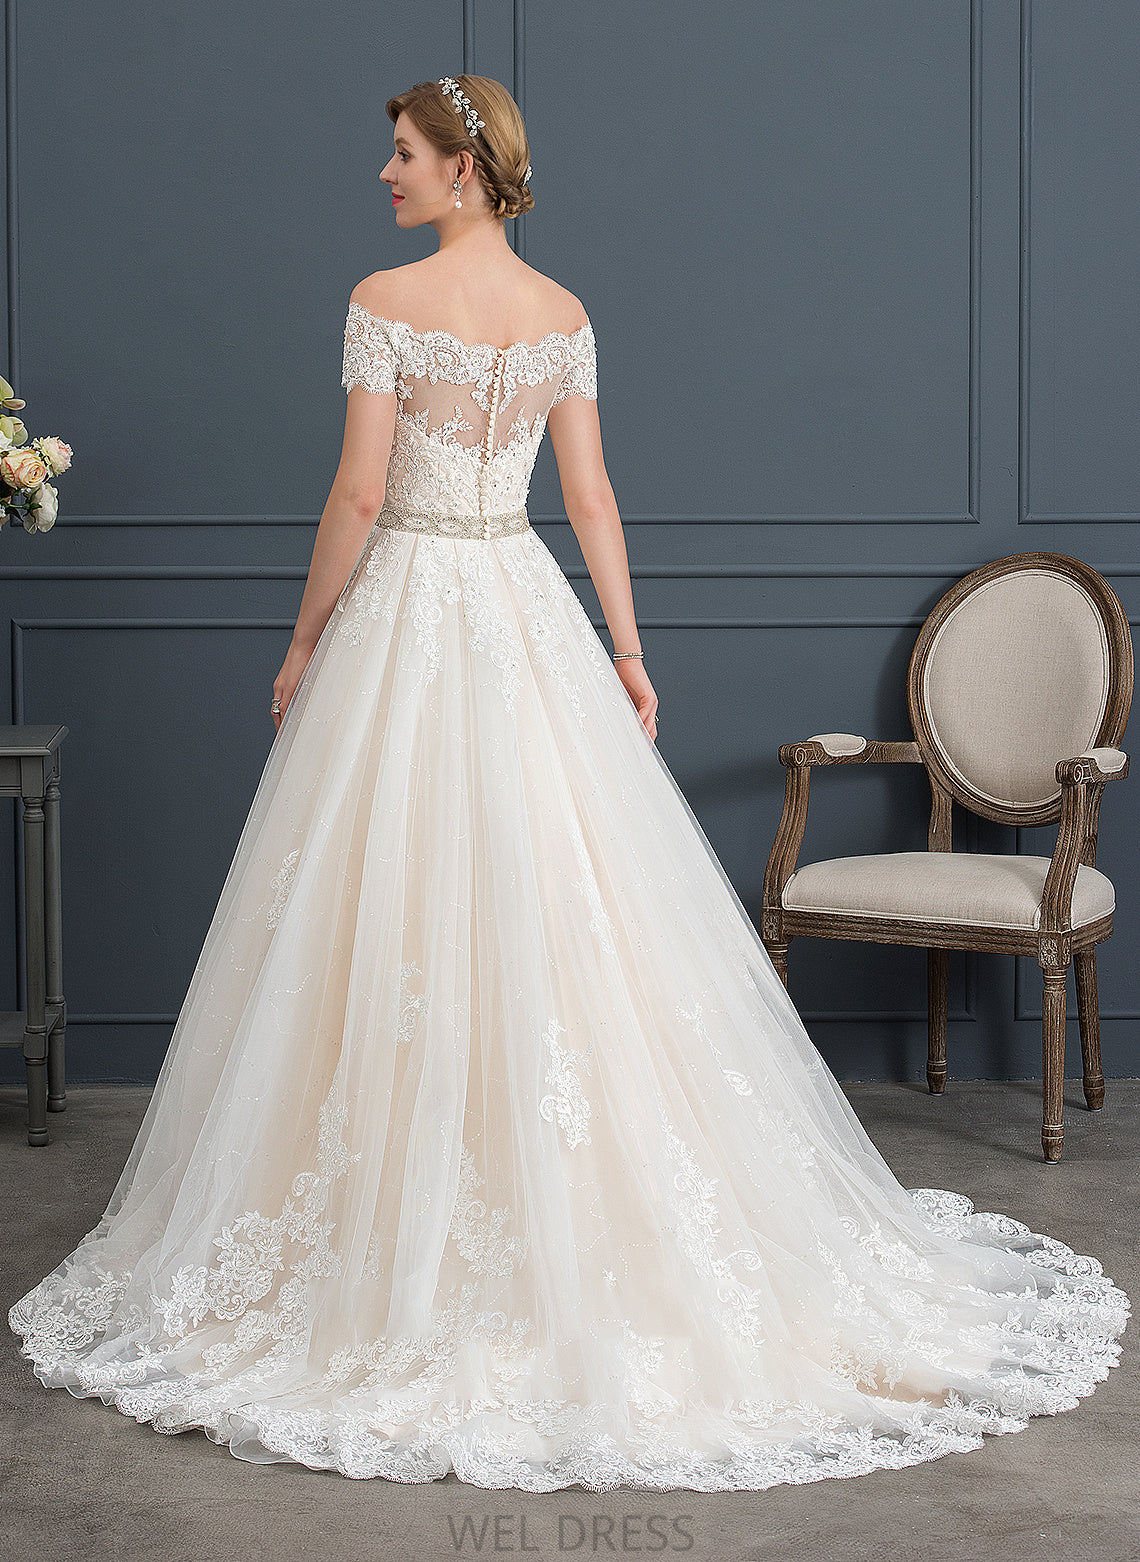 Court Sequins Wedding Dresses With Wedding Ball-Gown/Princess Beading Lilliana Train Tulle Dress